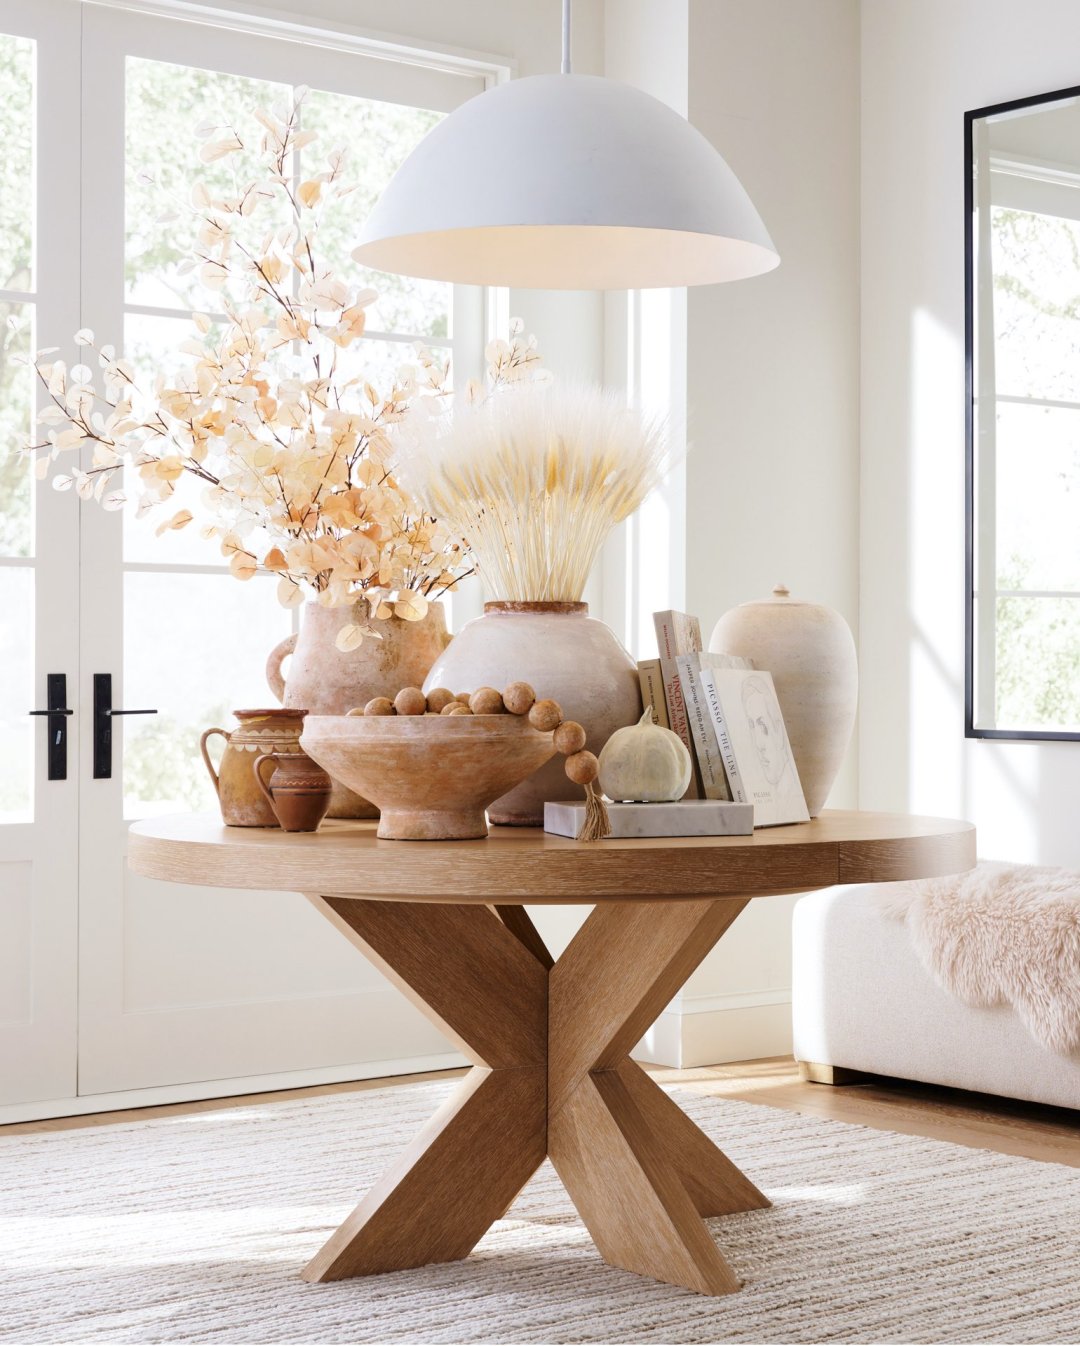 Ideas for neutral fall decor - round wood table with neutral accessories